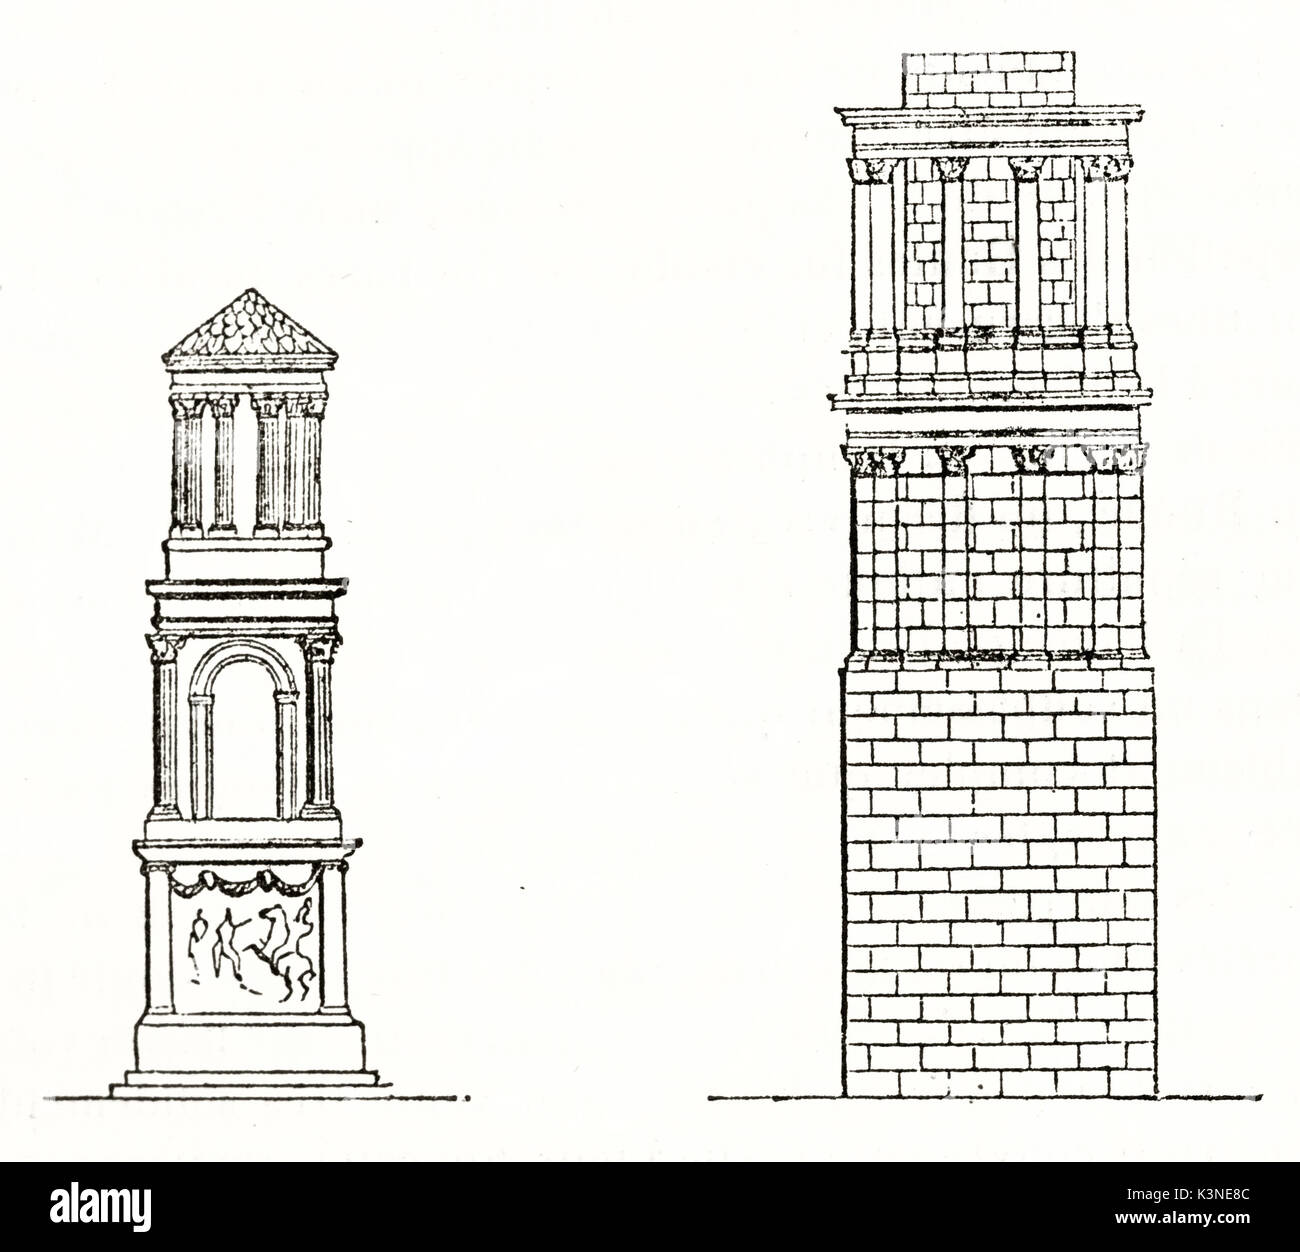 Two ancient schematic details of funerary architecture based on tower shape. By unidentified author, publ. on Magasin Pittoresque, Paris, 1839 Stock Photo